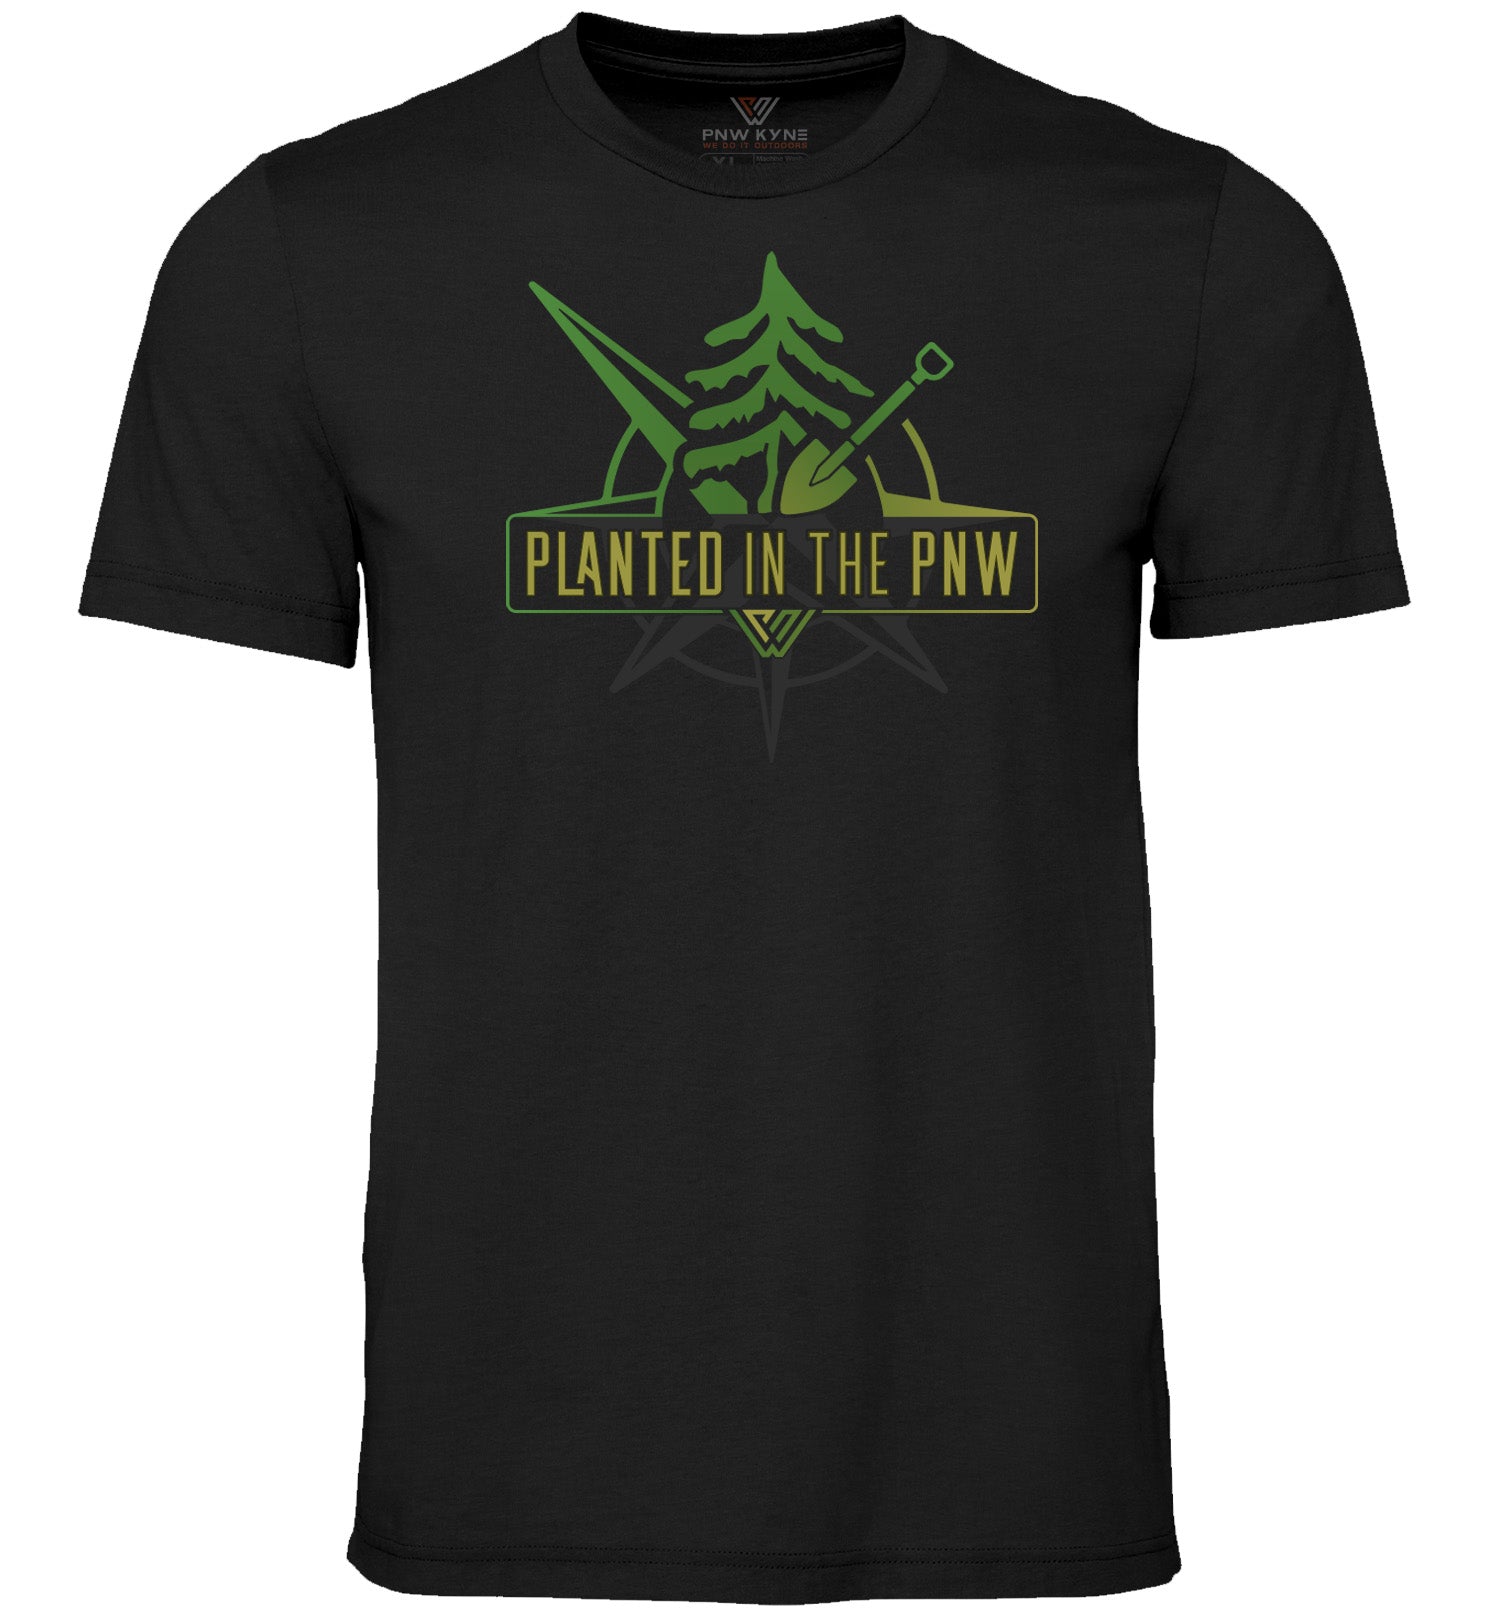 PNW Shirt - Planted in the PNW - Short Sleeve - Front - Black